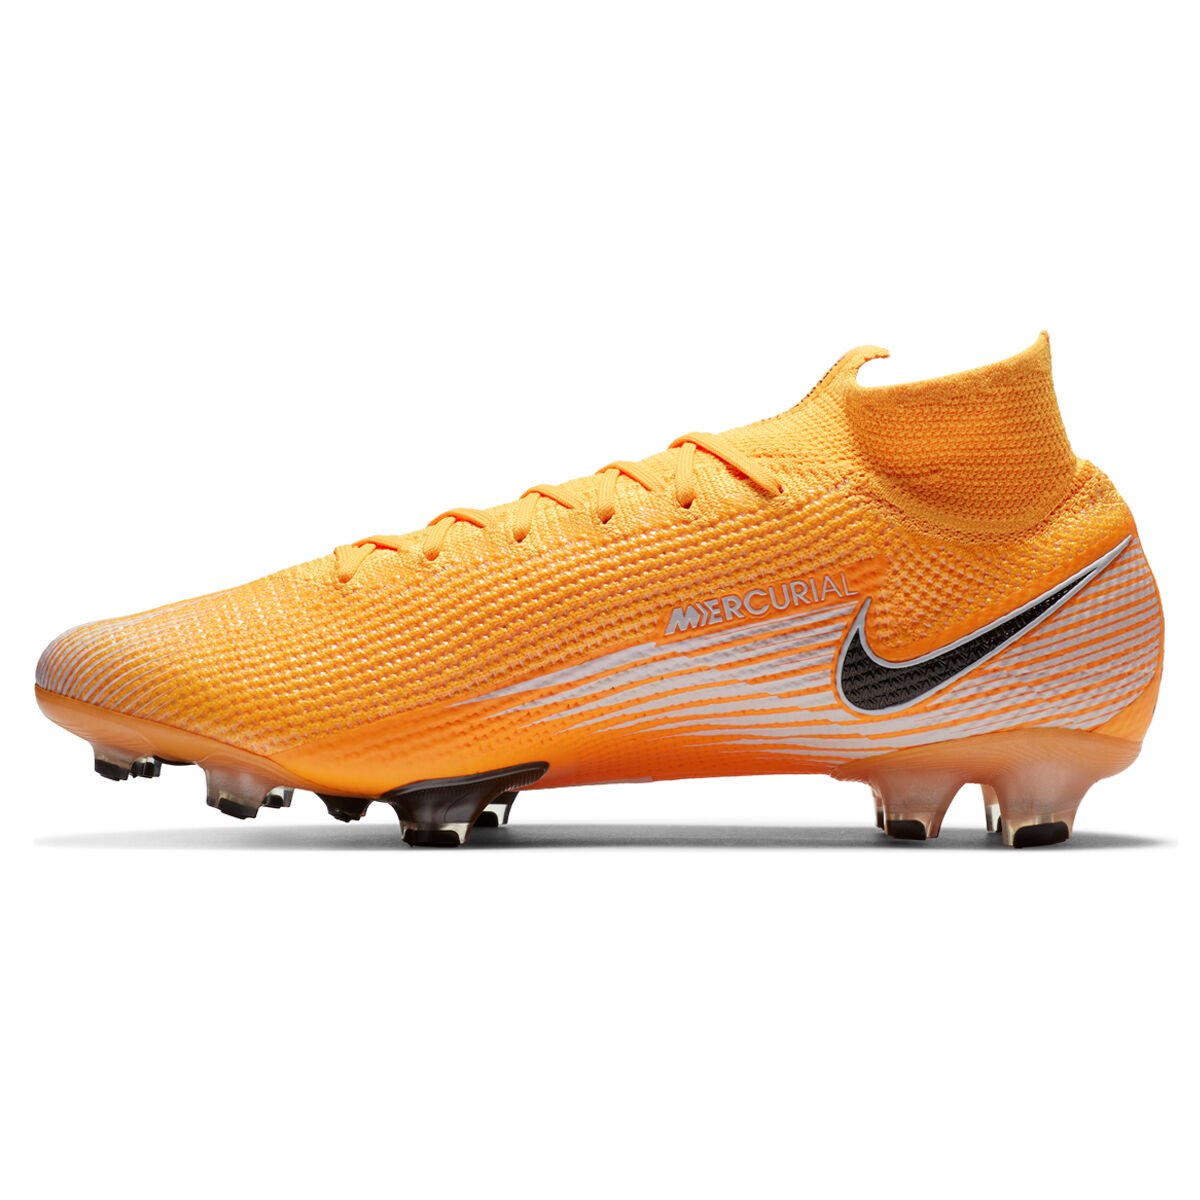 orange and white football boots